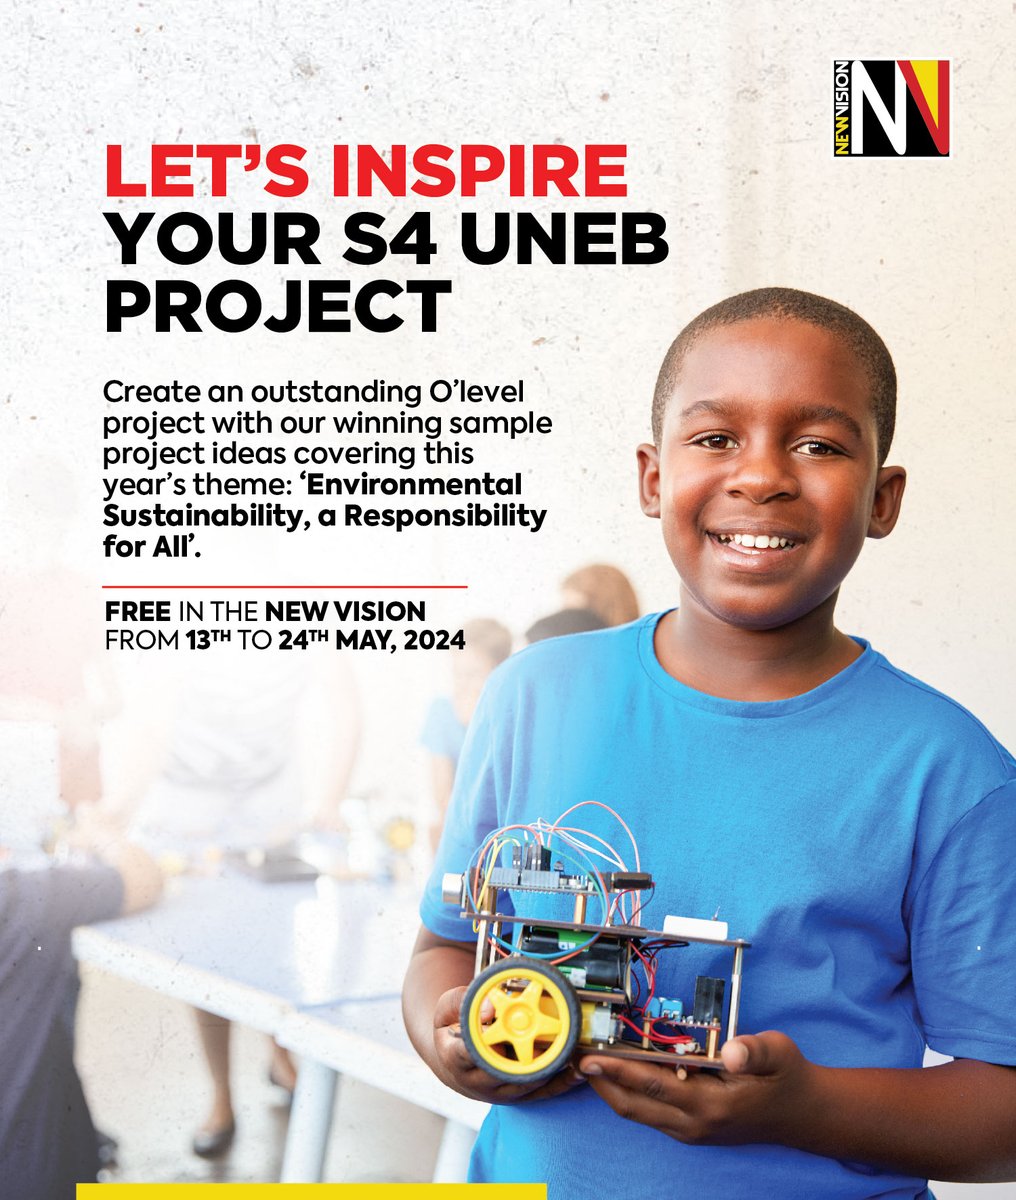 Need assistance with your O Level project? New Vision provides free sample project ideas based on this year's theme, 'Environment Sustainability, a Responsibility for All,' to help you excel. Discover them in the today's New Vision! #S4UNEBProject #VisionUpdates